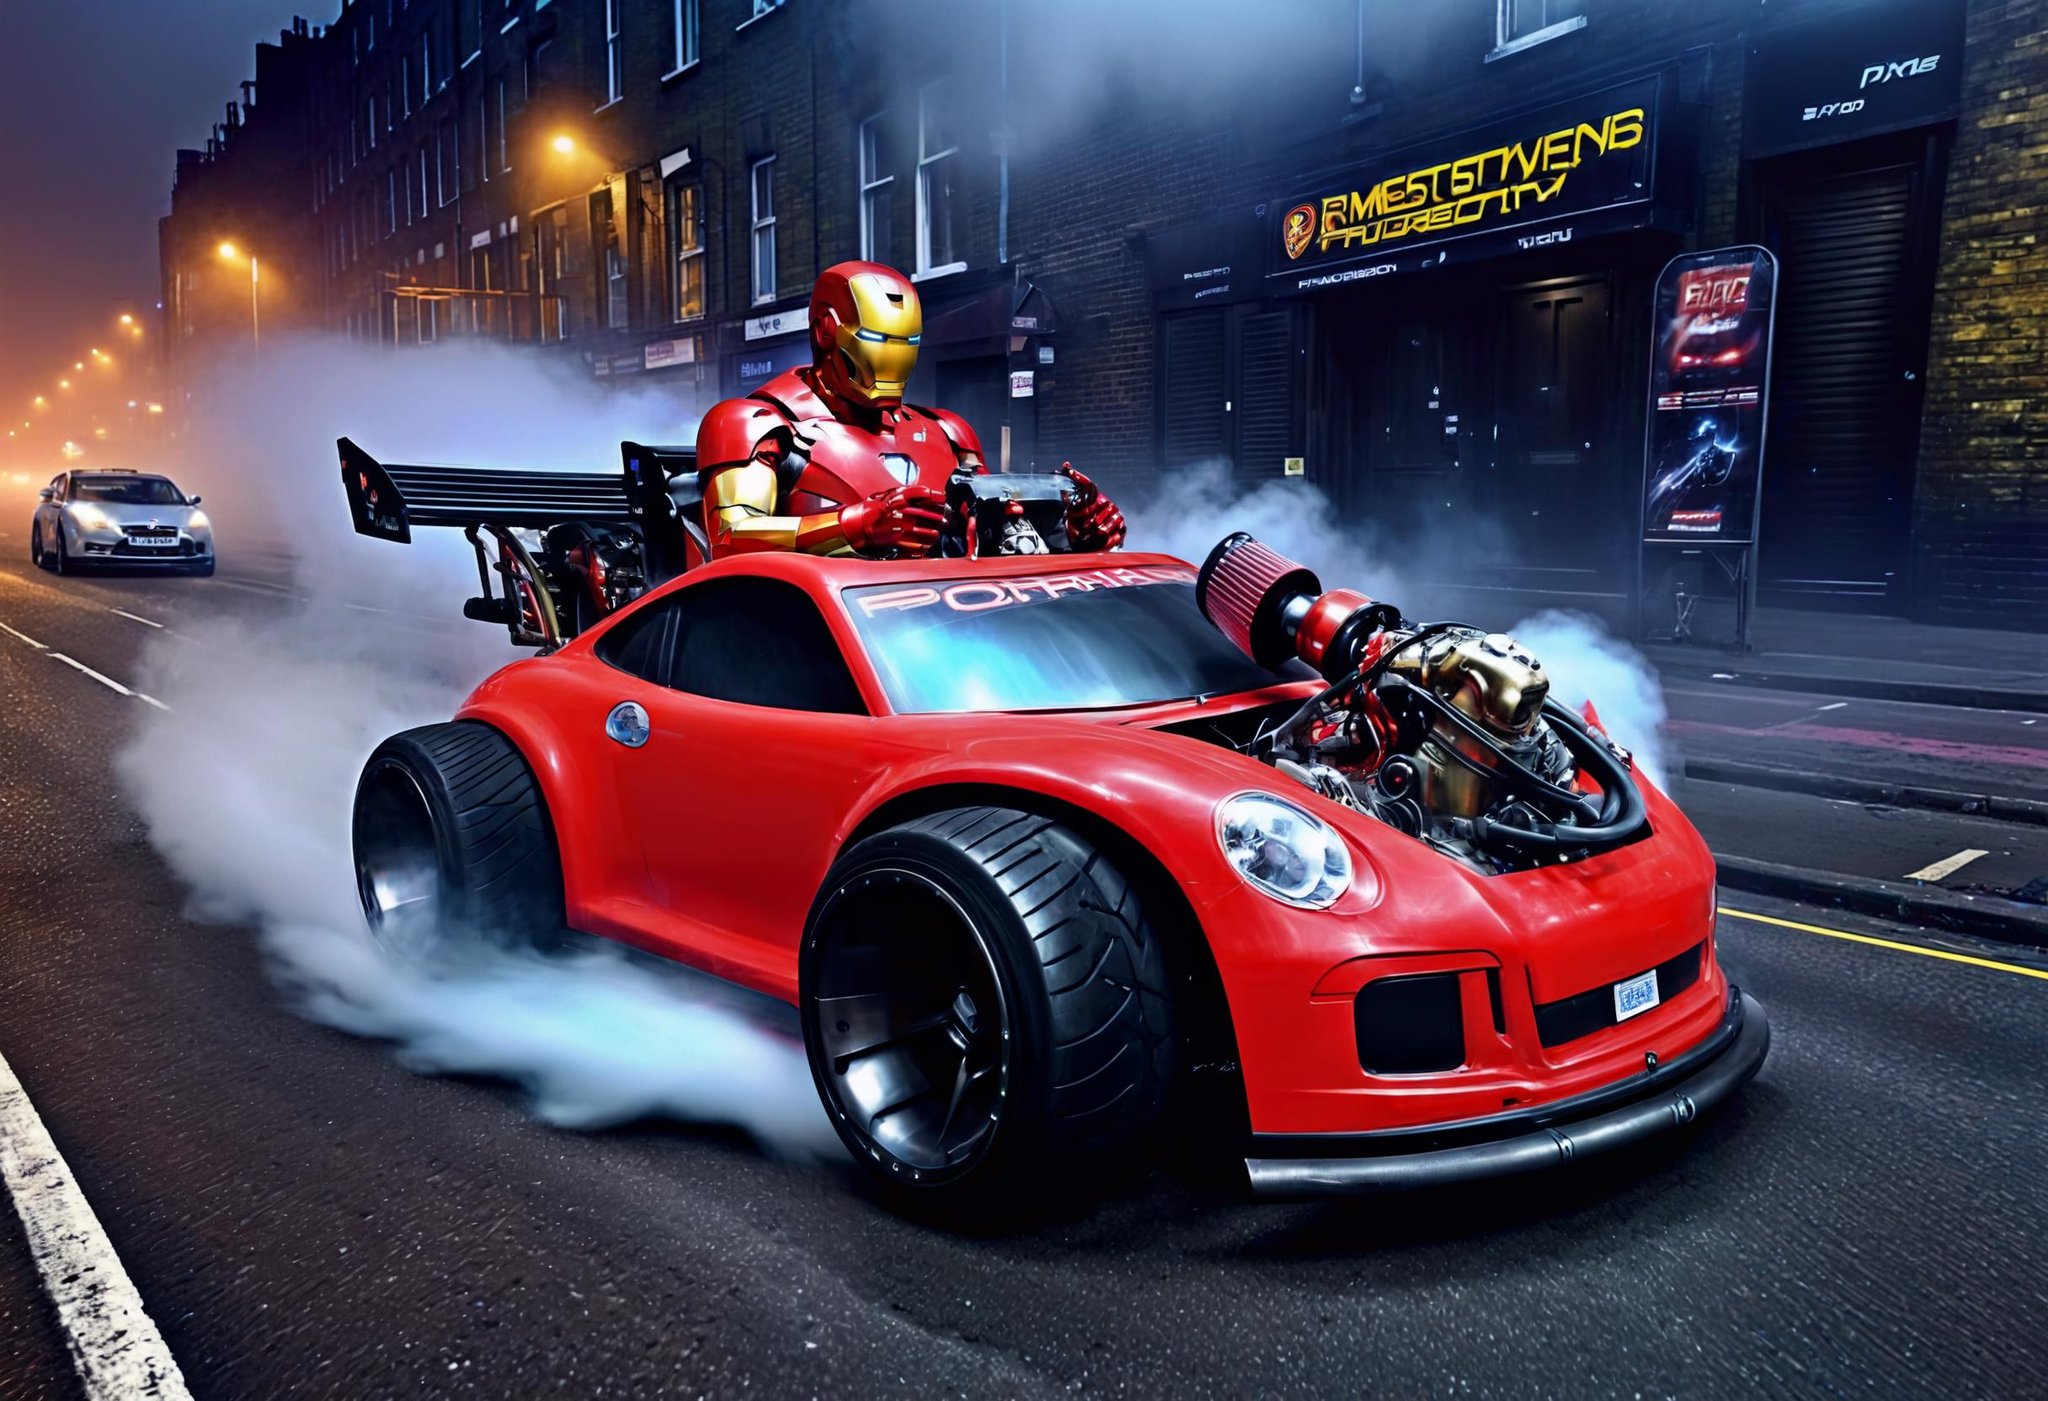 HDR photo of RAW photo, ironman driving a pturbo, london city,nighttime, fog, smoke, high speed, neon lights,  . High dynamic range, vivid, rich details, clear shadows and highlights, realistic, intense, enhanced contrast, highly detailed